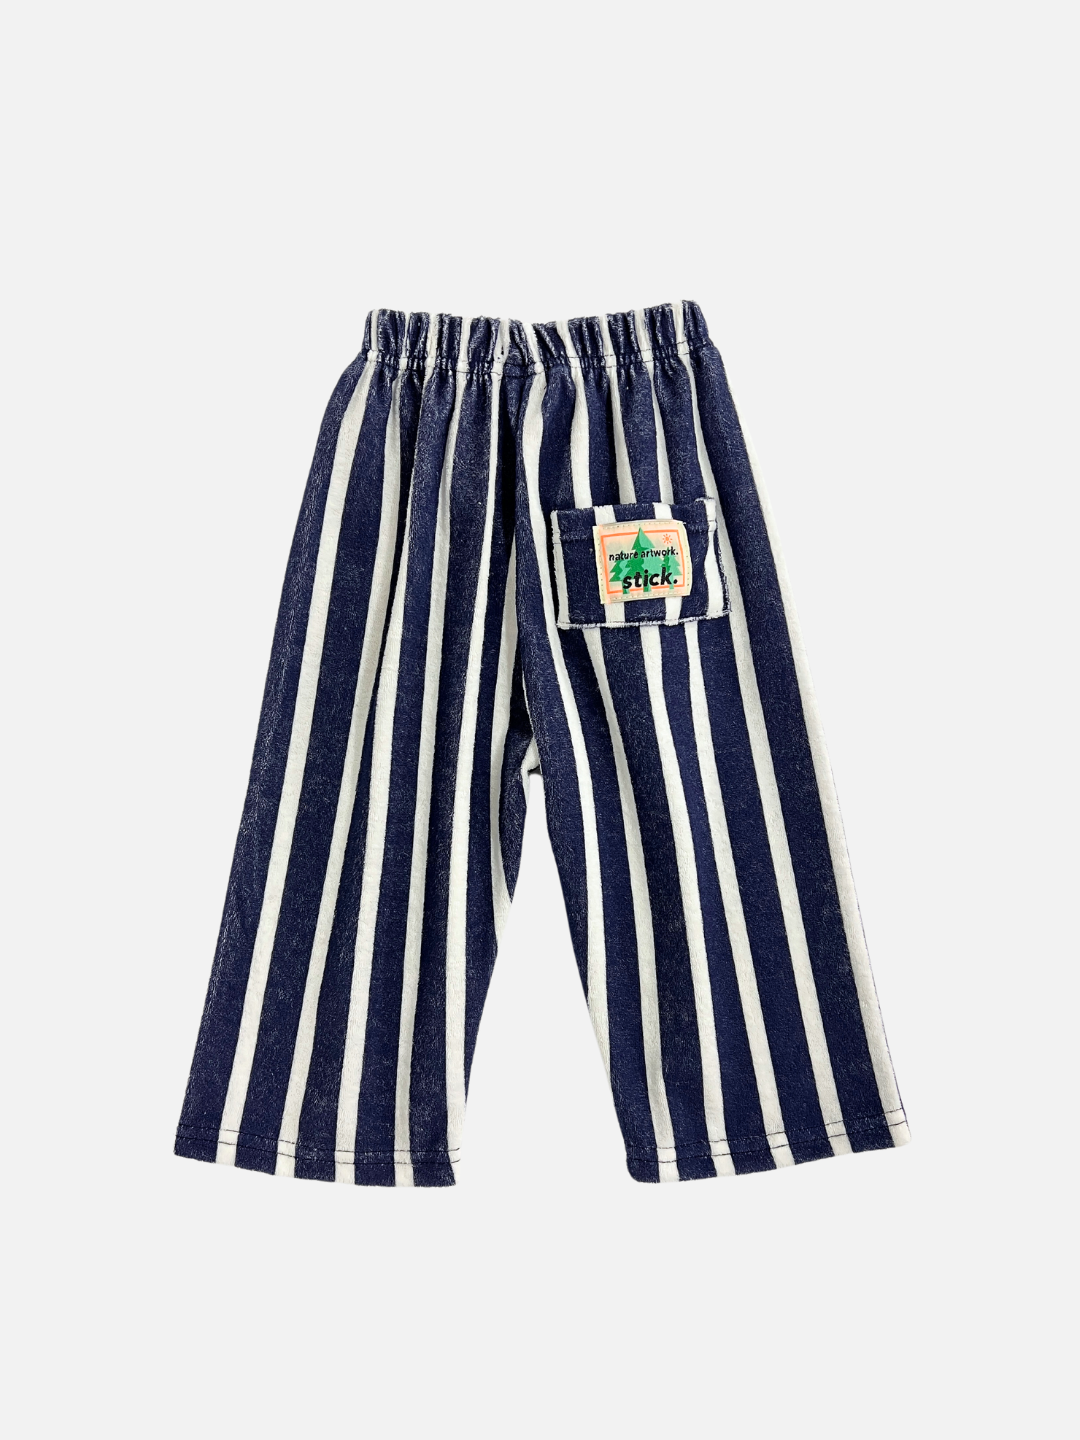 Back view of the Paint Roller Pants in Terry fabric white/navy stripes. "Stick" patch logo on the right back pocket.